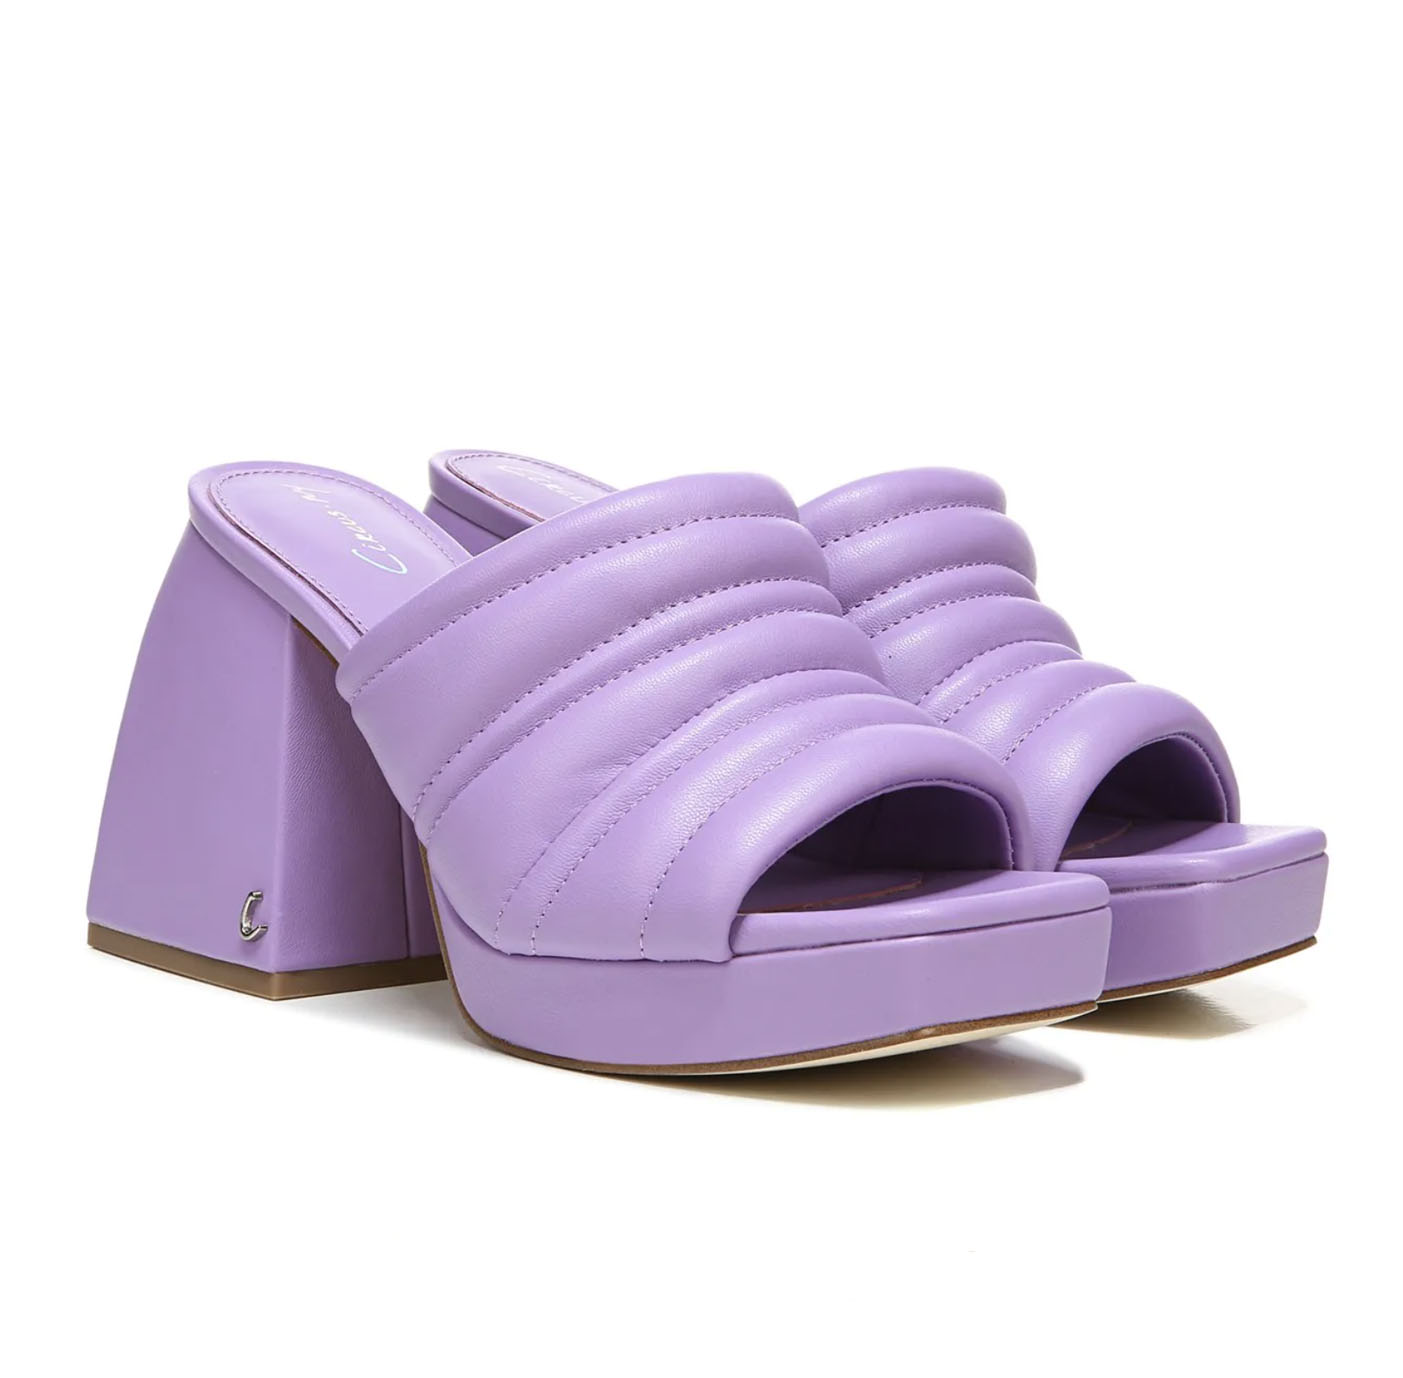 8 Trendy Platform Sandals That’ll Kick Your Spring Off Right